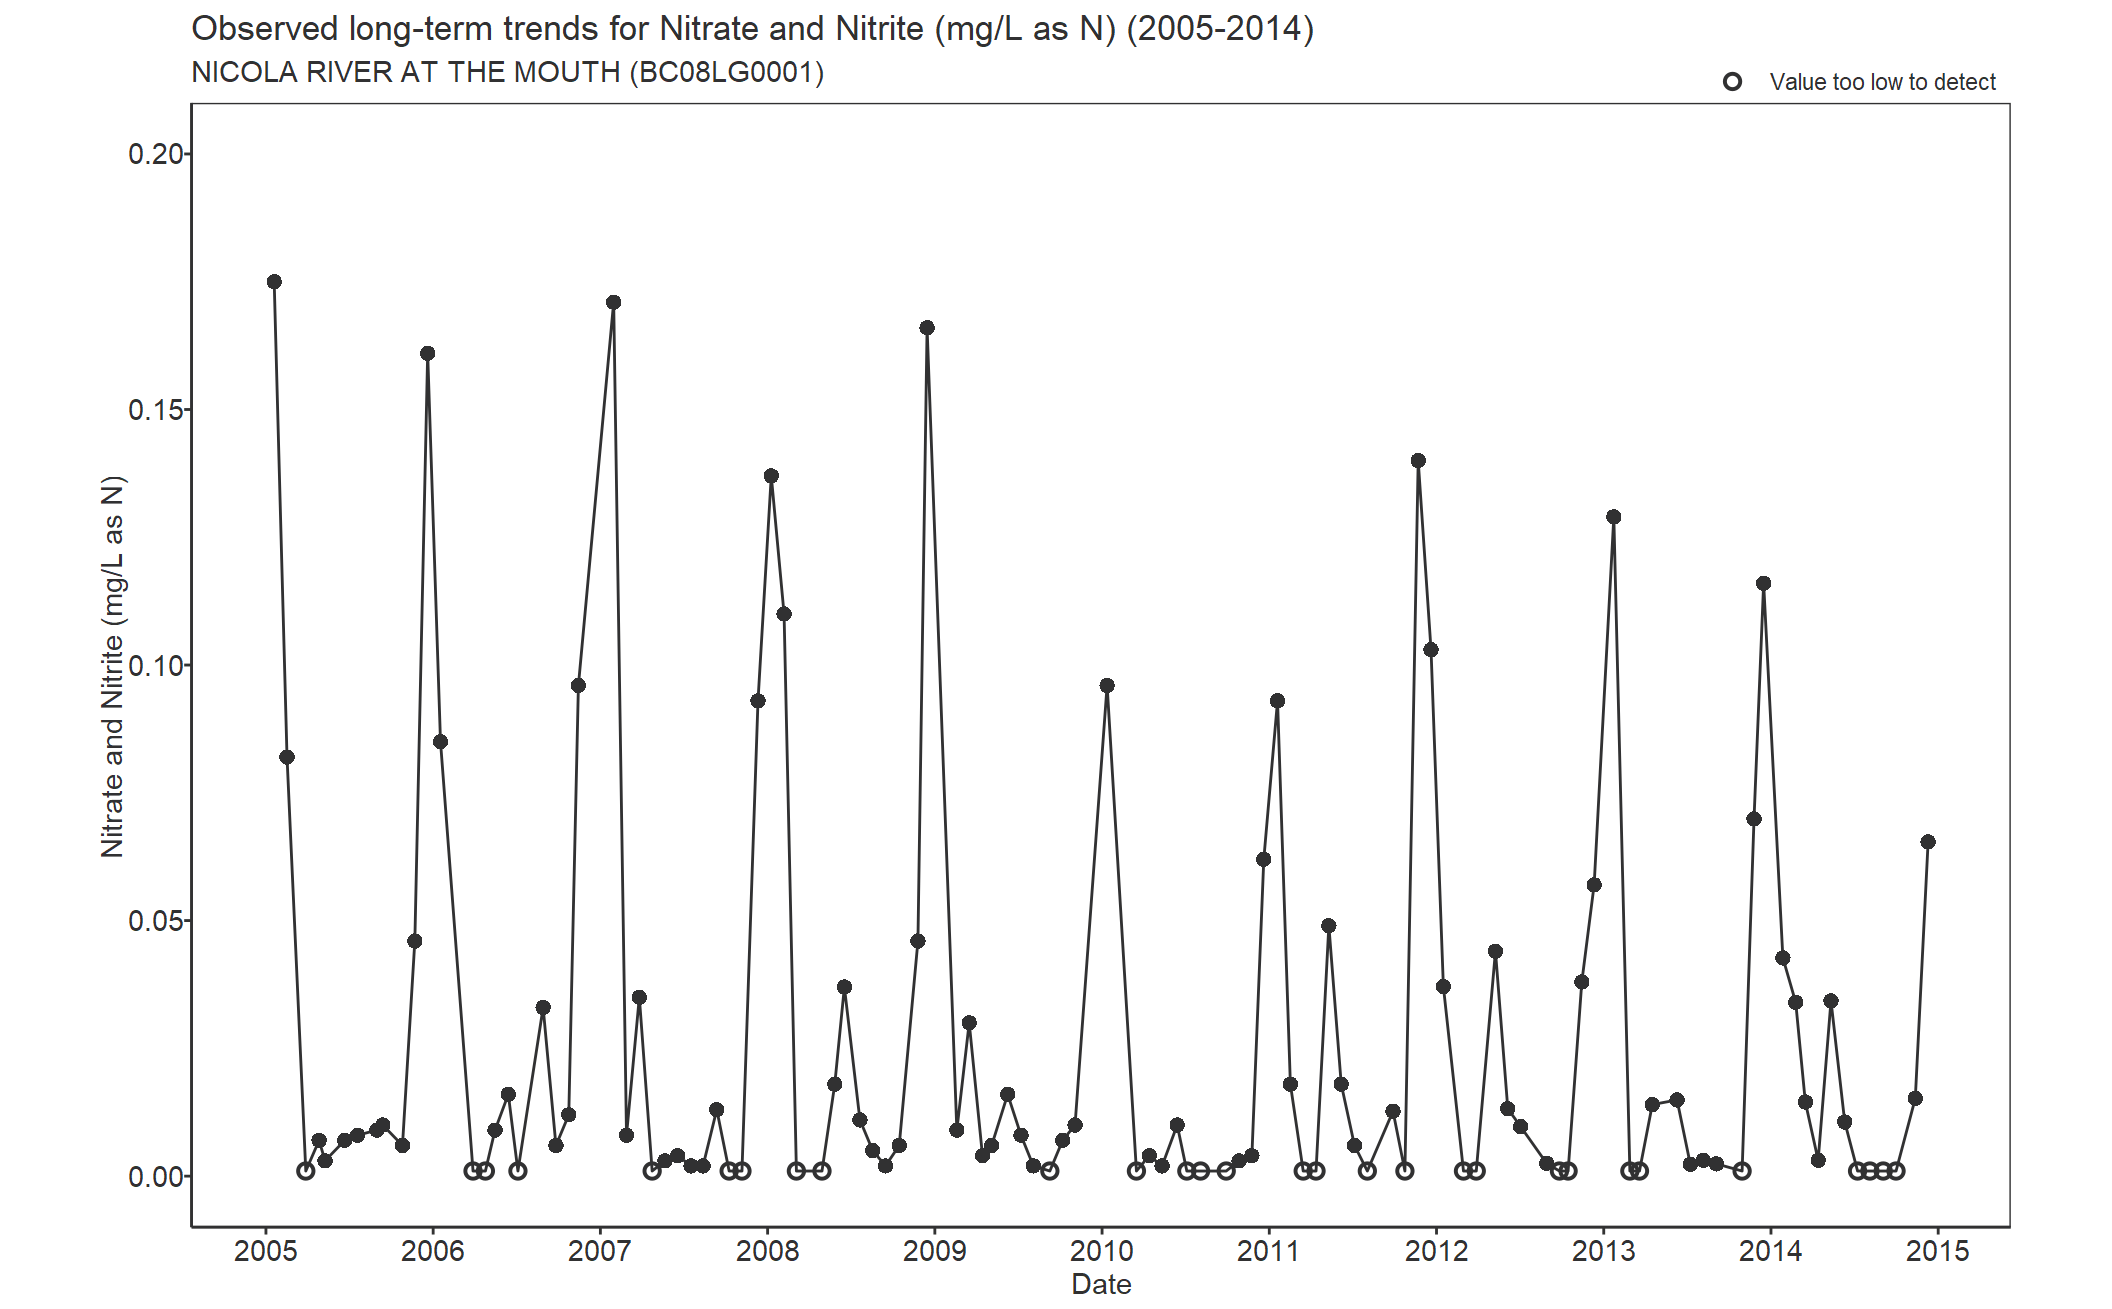 Observed long-term trends for Nitrate and Nitrite (2005-2014)